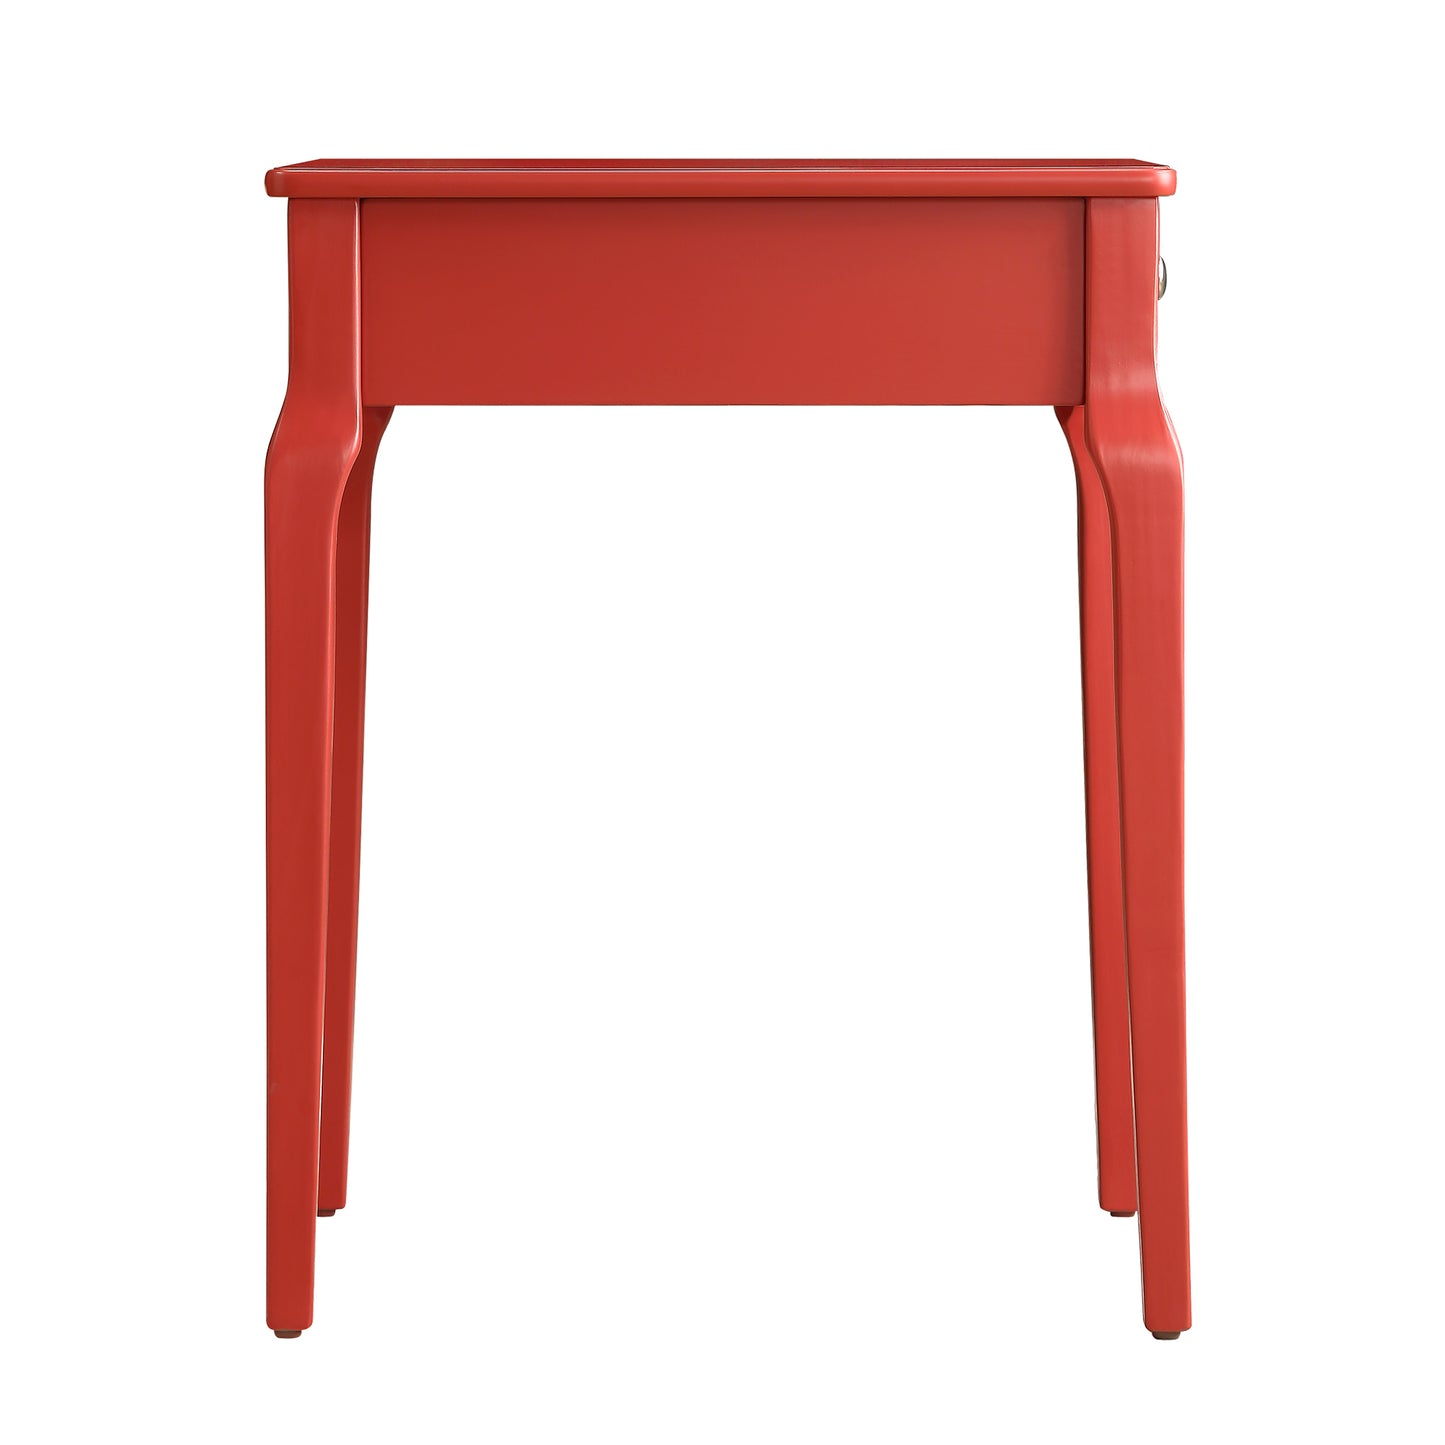 1-Drawer Wood Side Table - Red